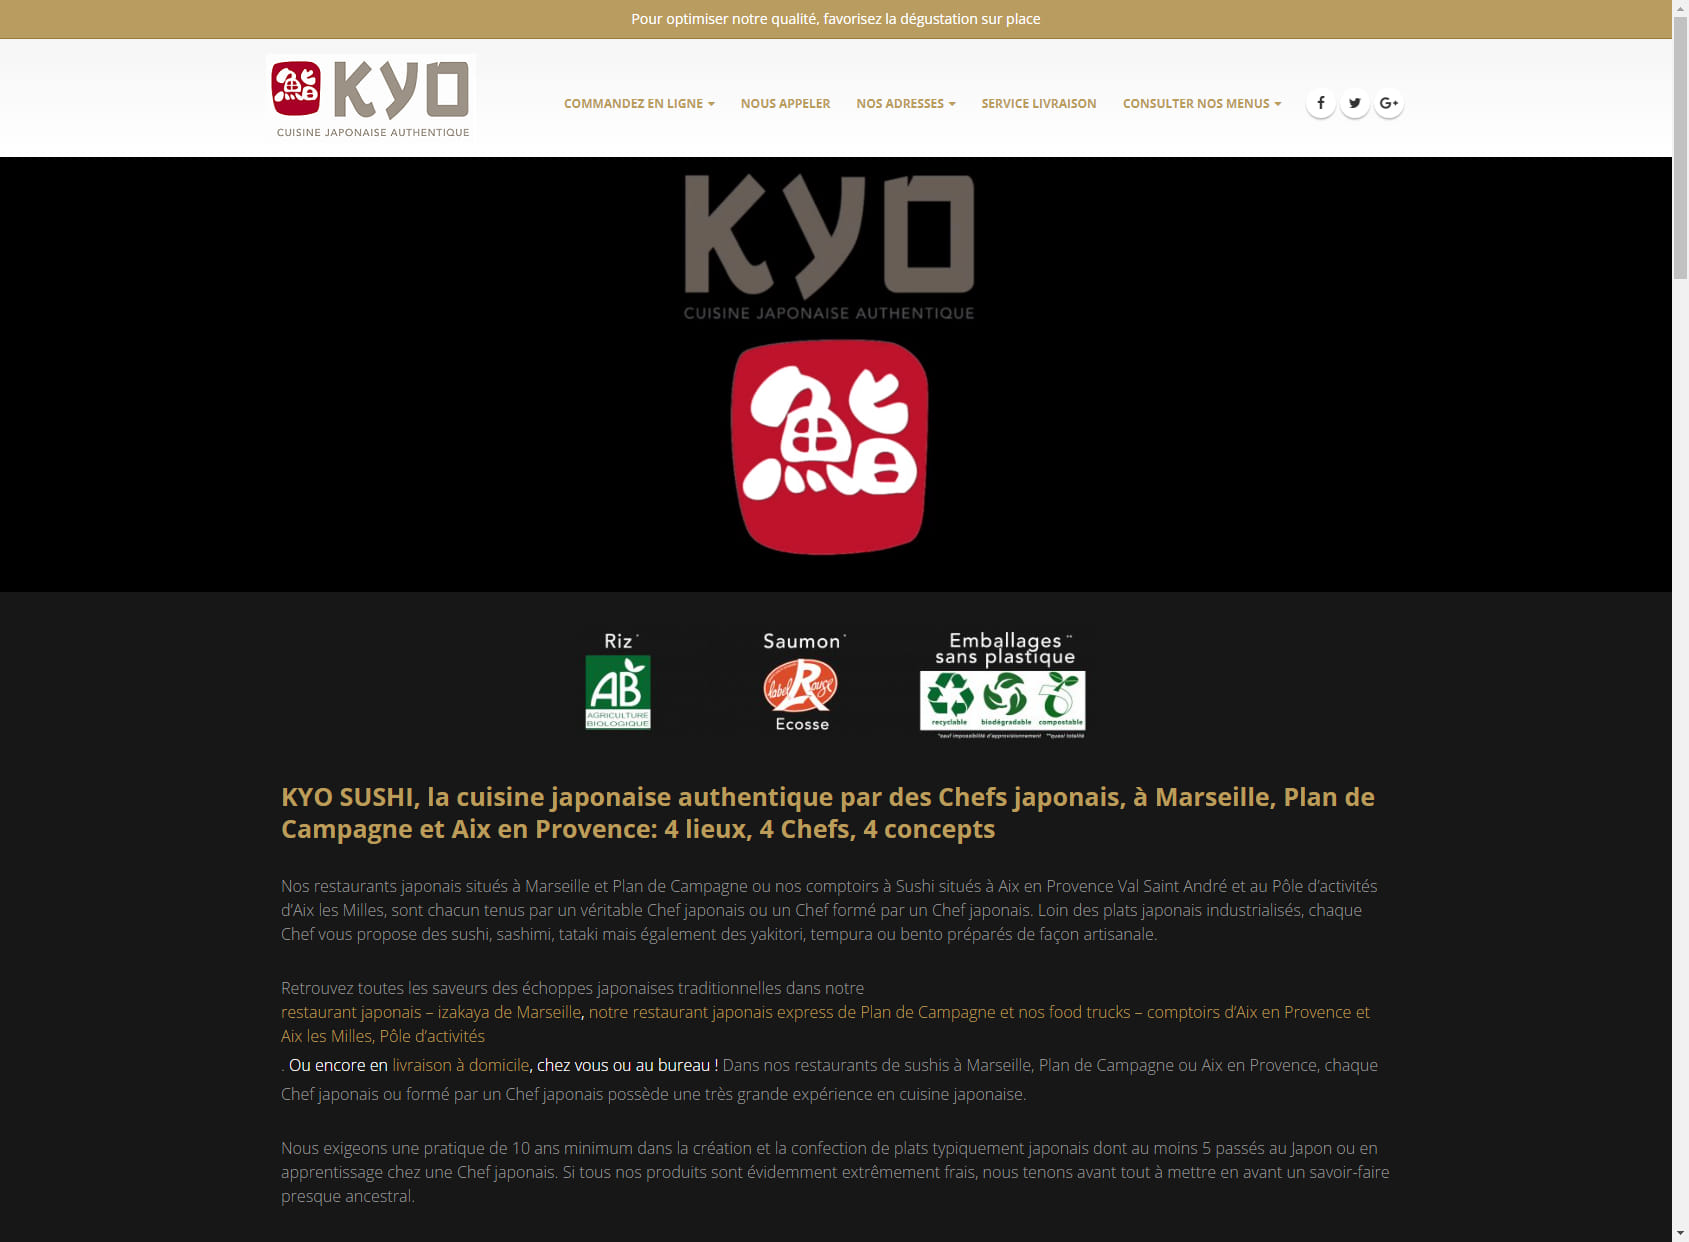 KYO SUSHI by japanese chefs